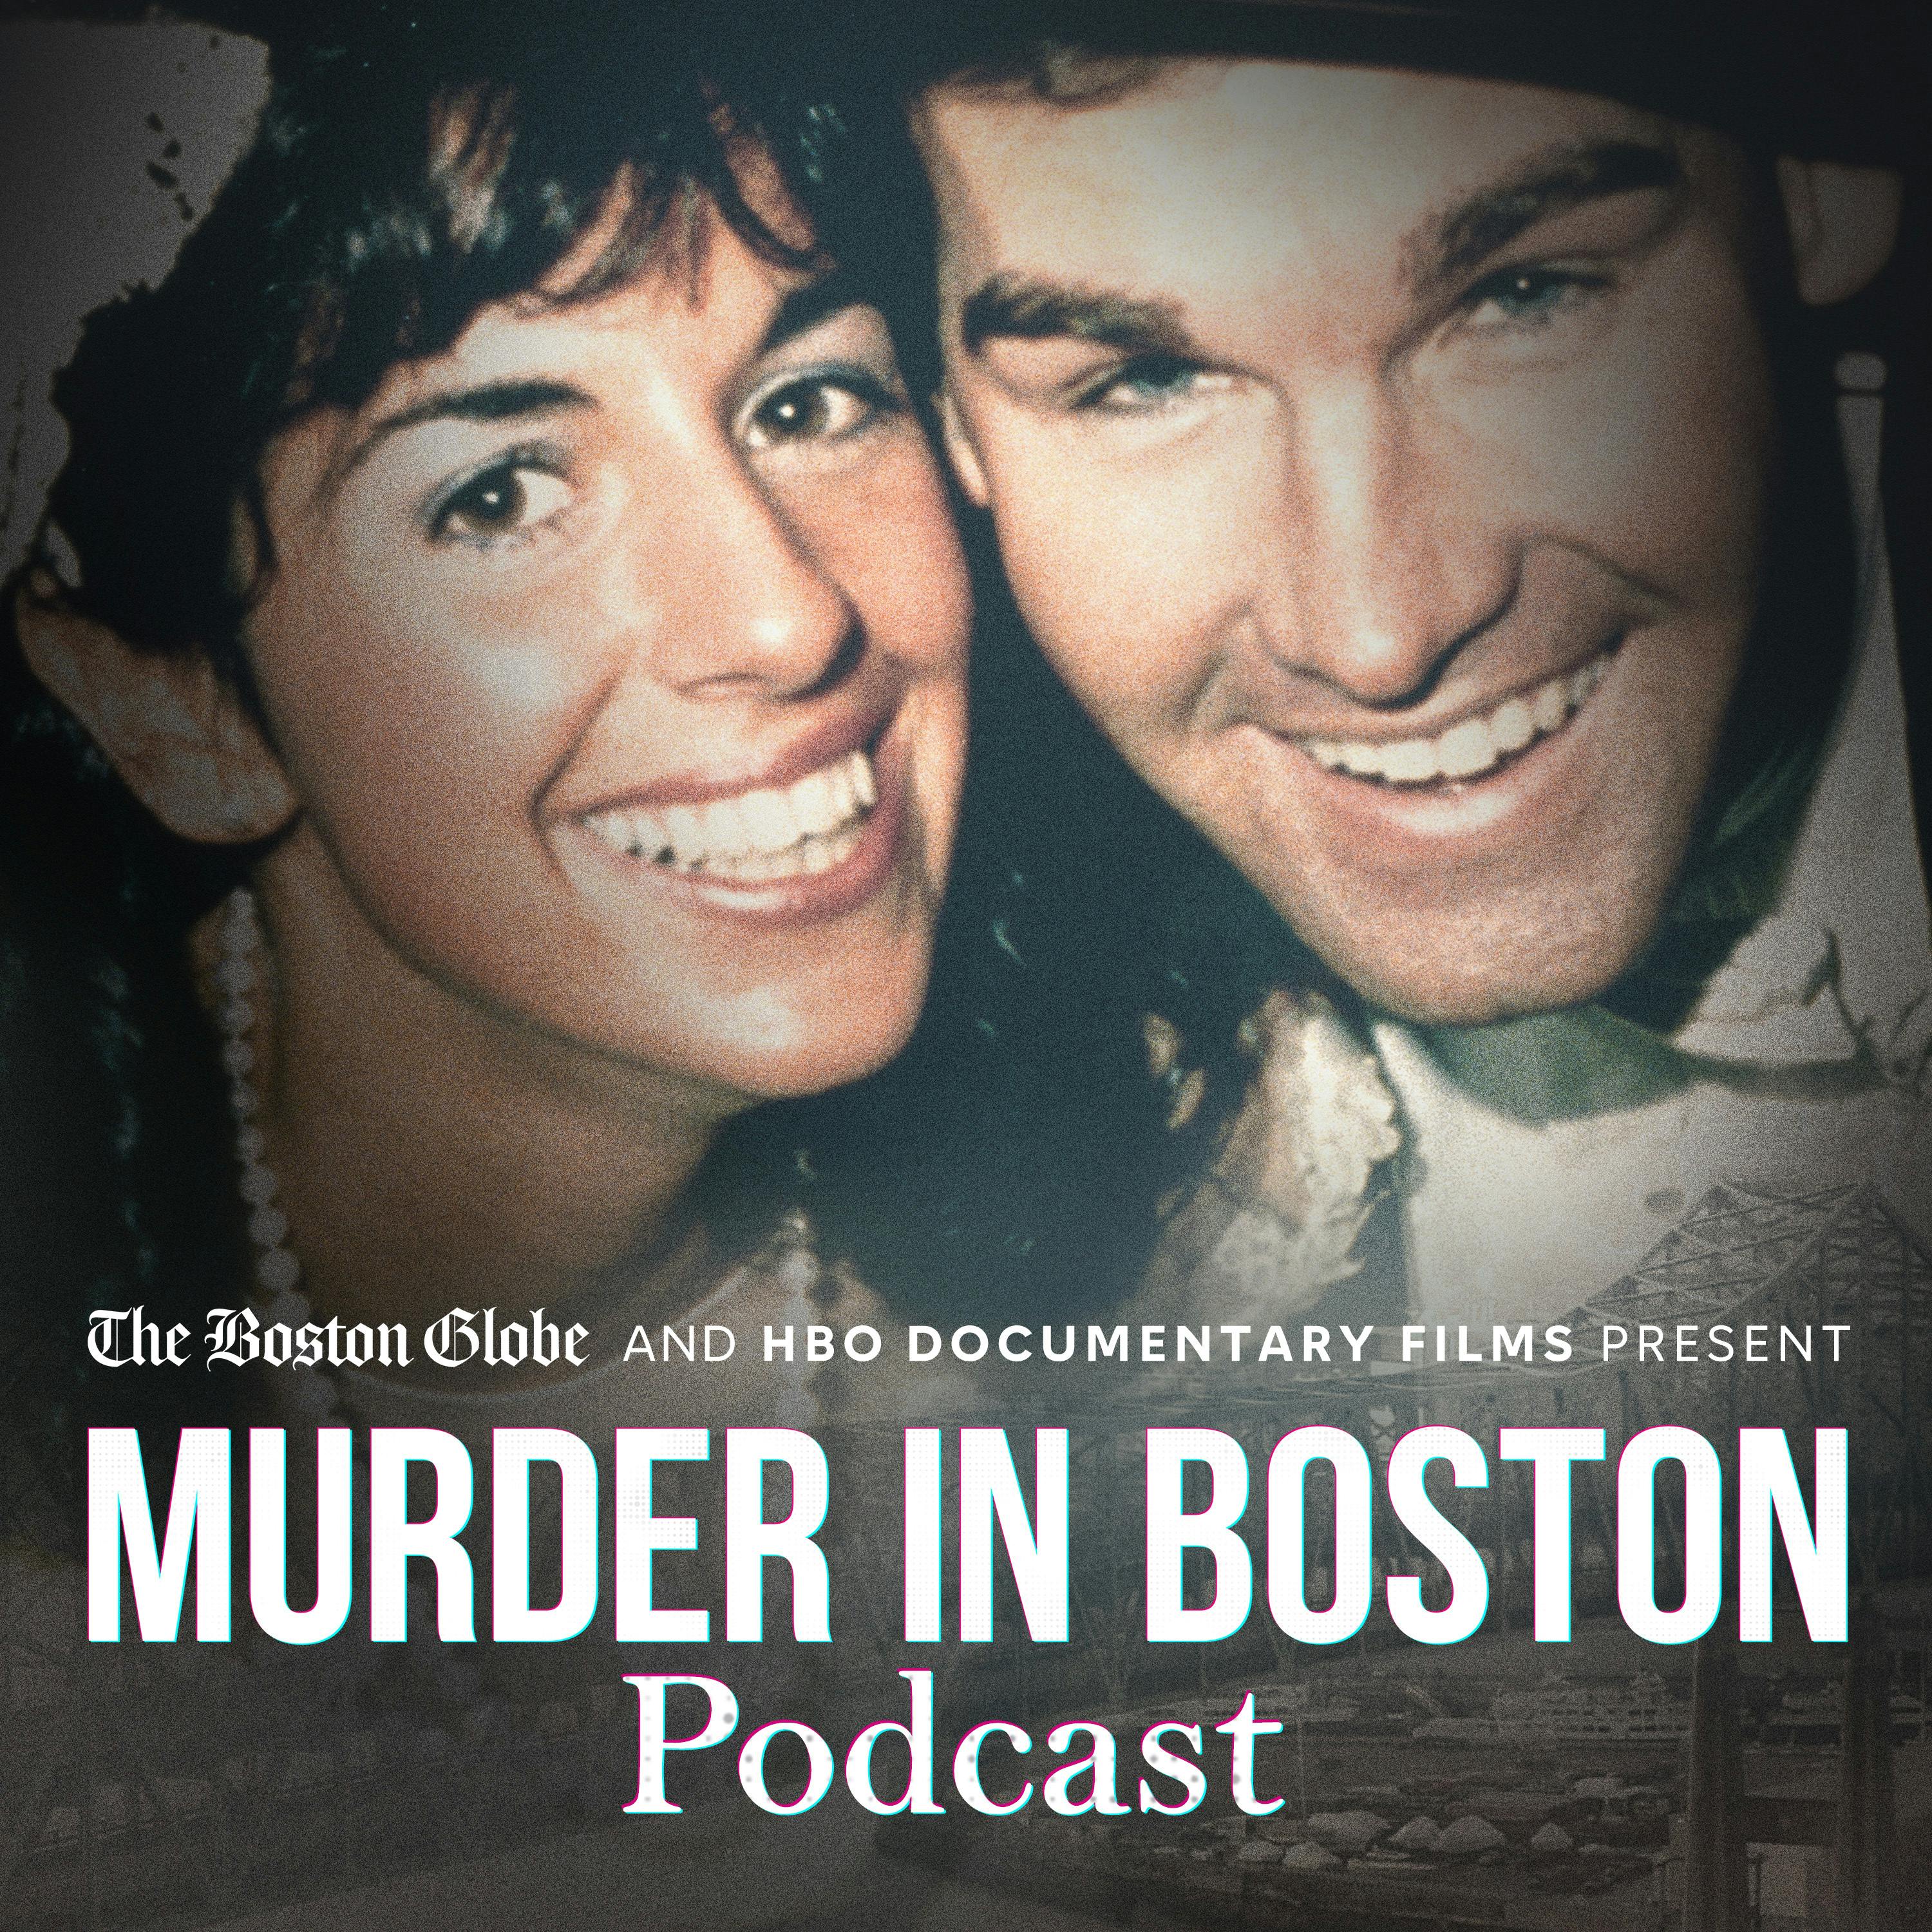 Murder in Boston Podcast podcast show image